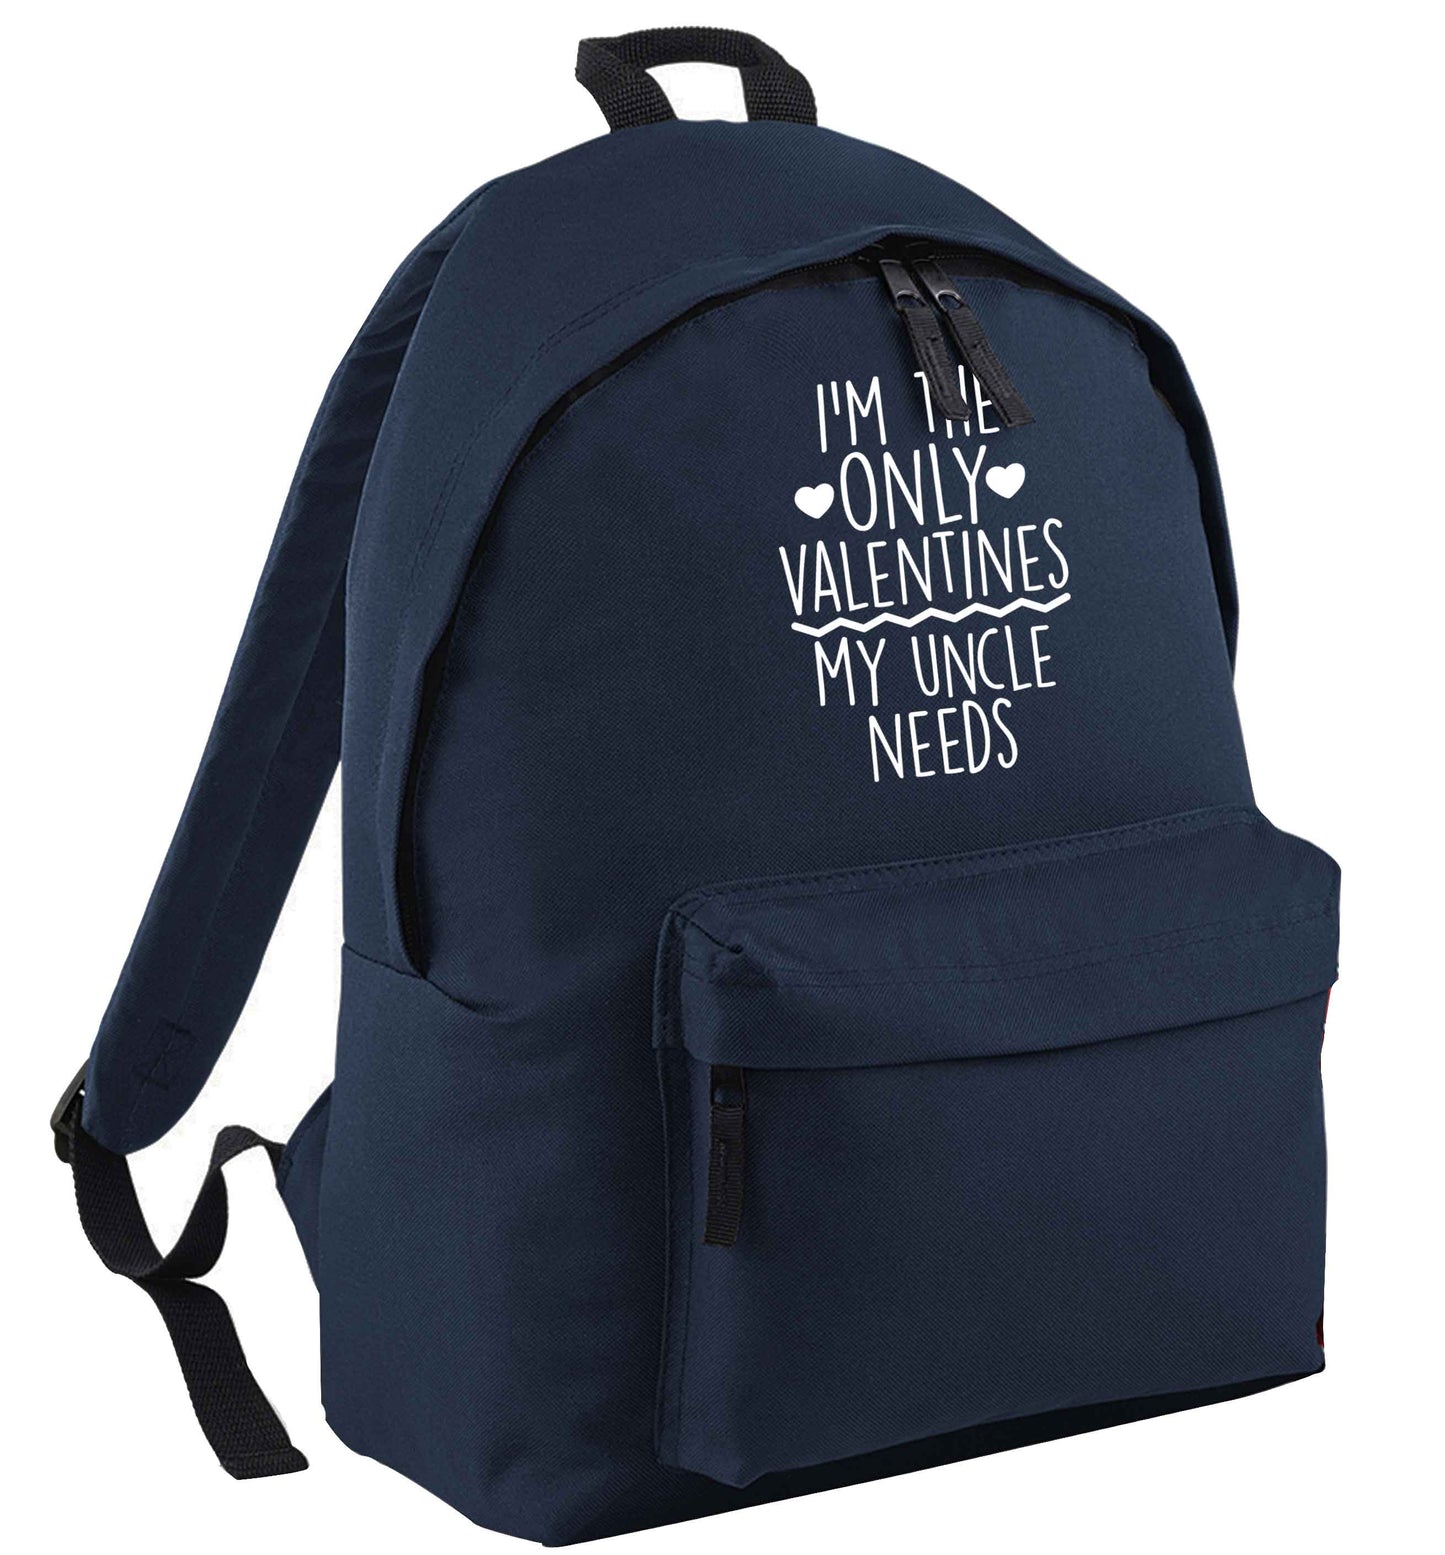 I'm the only valentines my uncle needs navy adults backpack